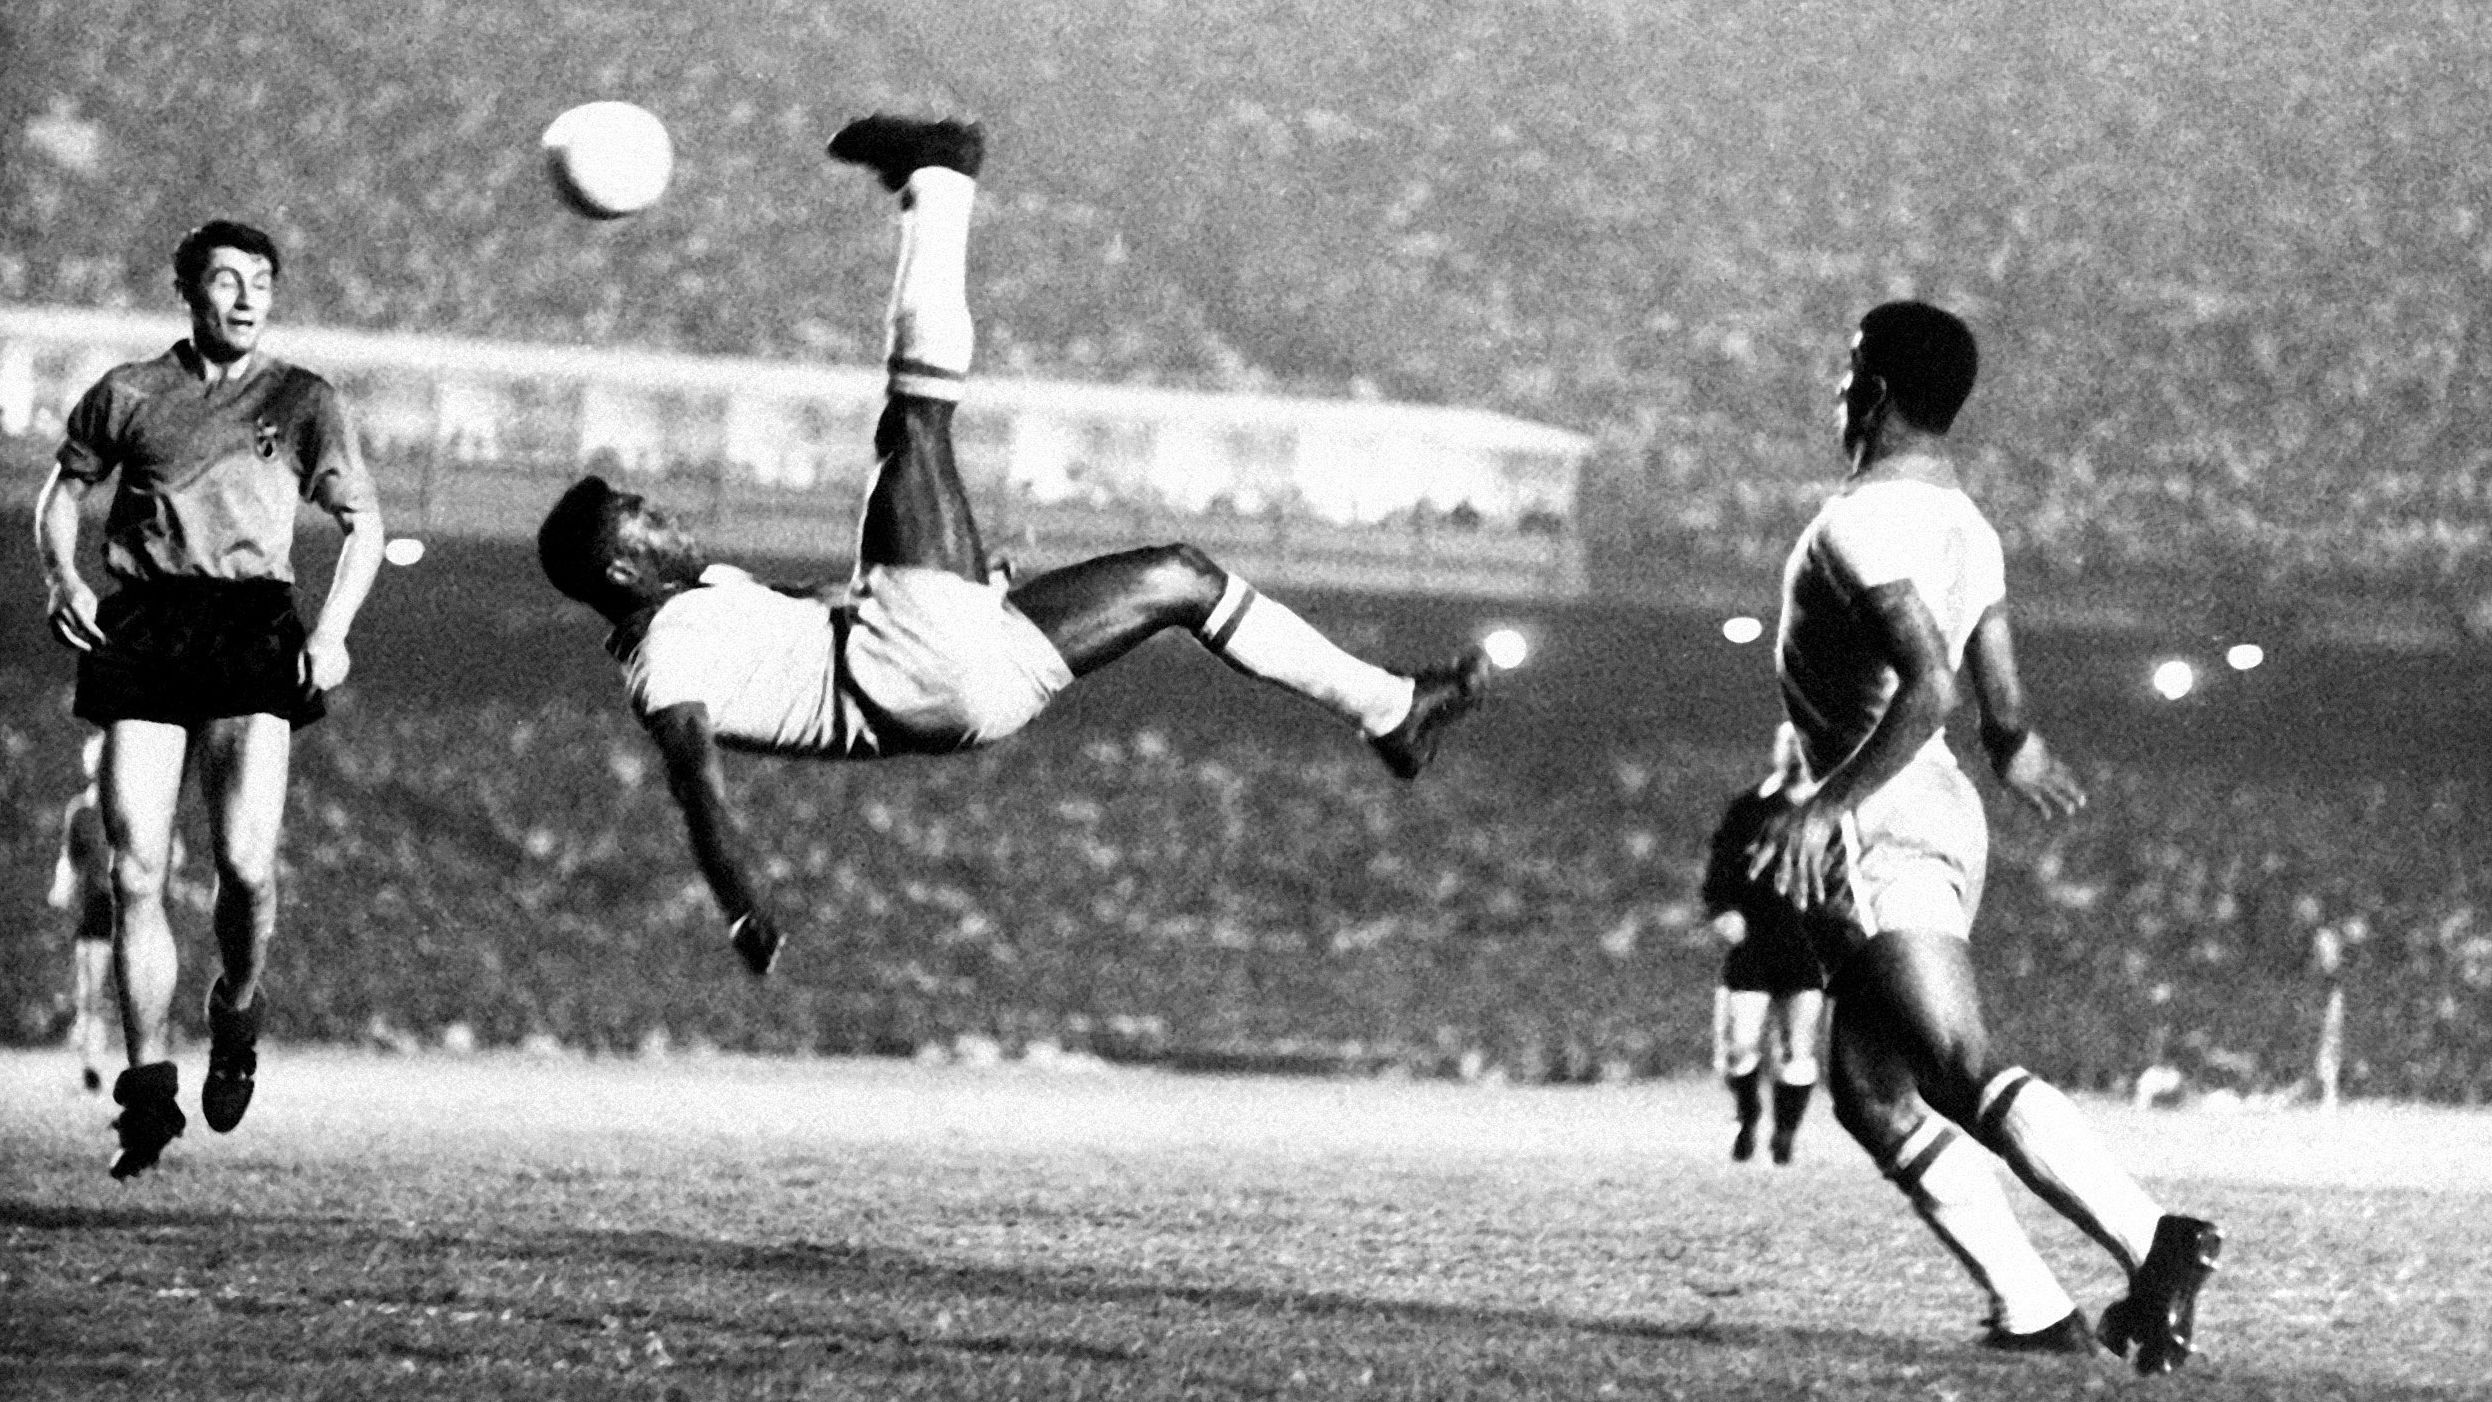 Pelé performs an overhead kick during a match in 1965. Dutch soccer star Johan Cruyff once said Pelé "was the only footballer who surpassed the boundaries of logic."